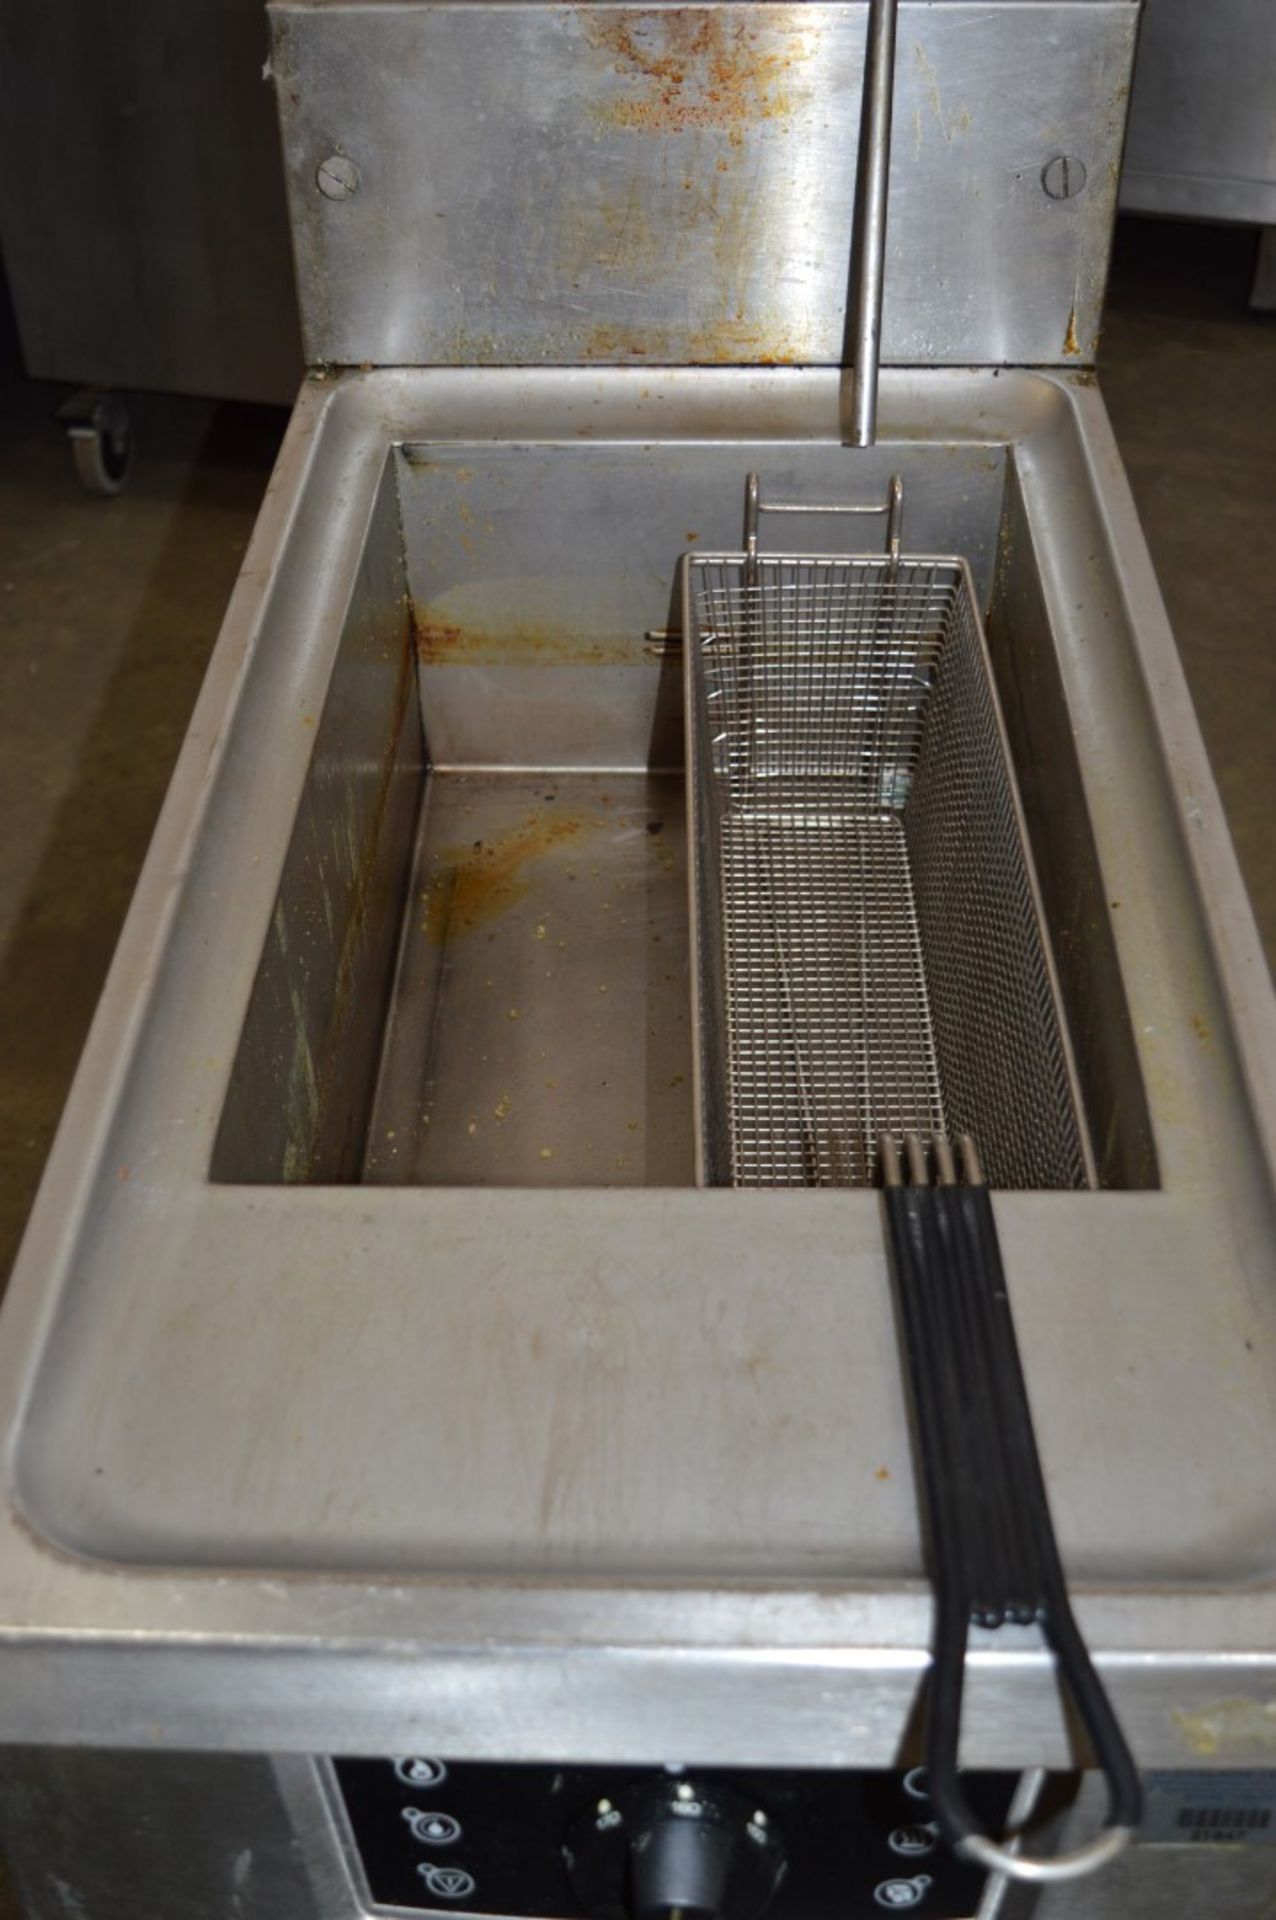 1 x Falcon Infinity Commercial Catering Gas Deep Fat Fryer - Stainless Steel Construction - H161 x - Image 2 of 5